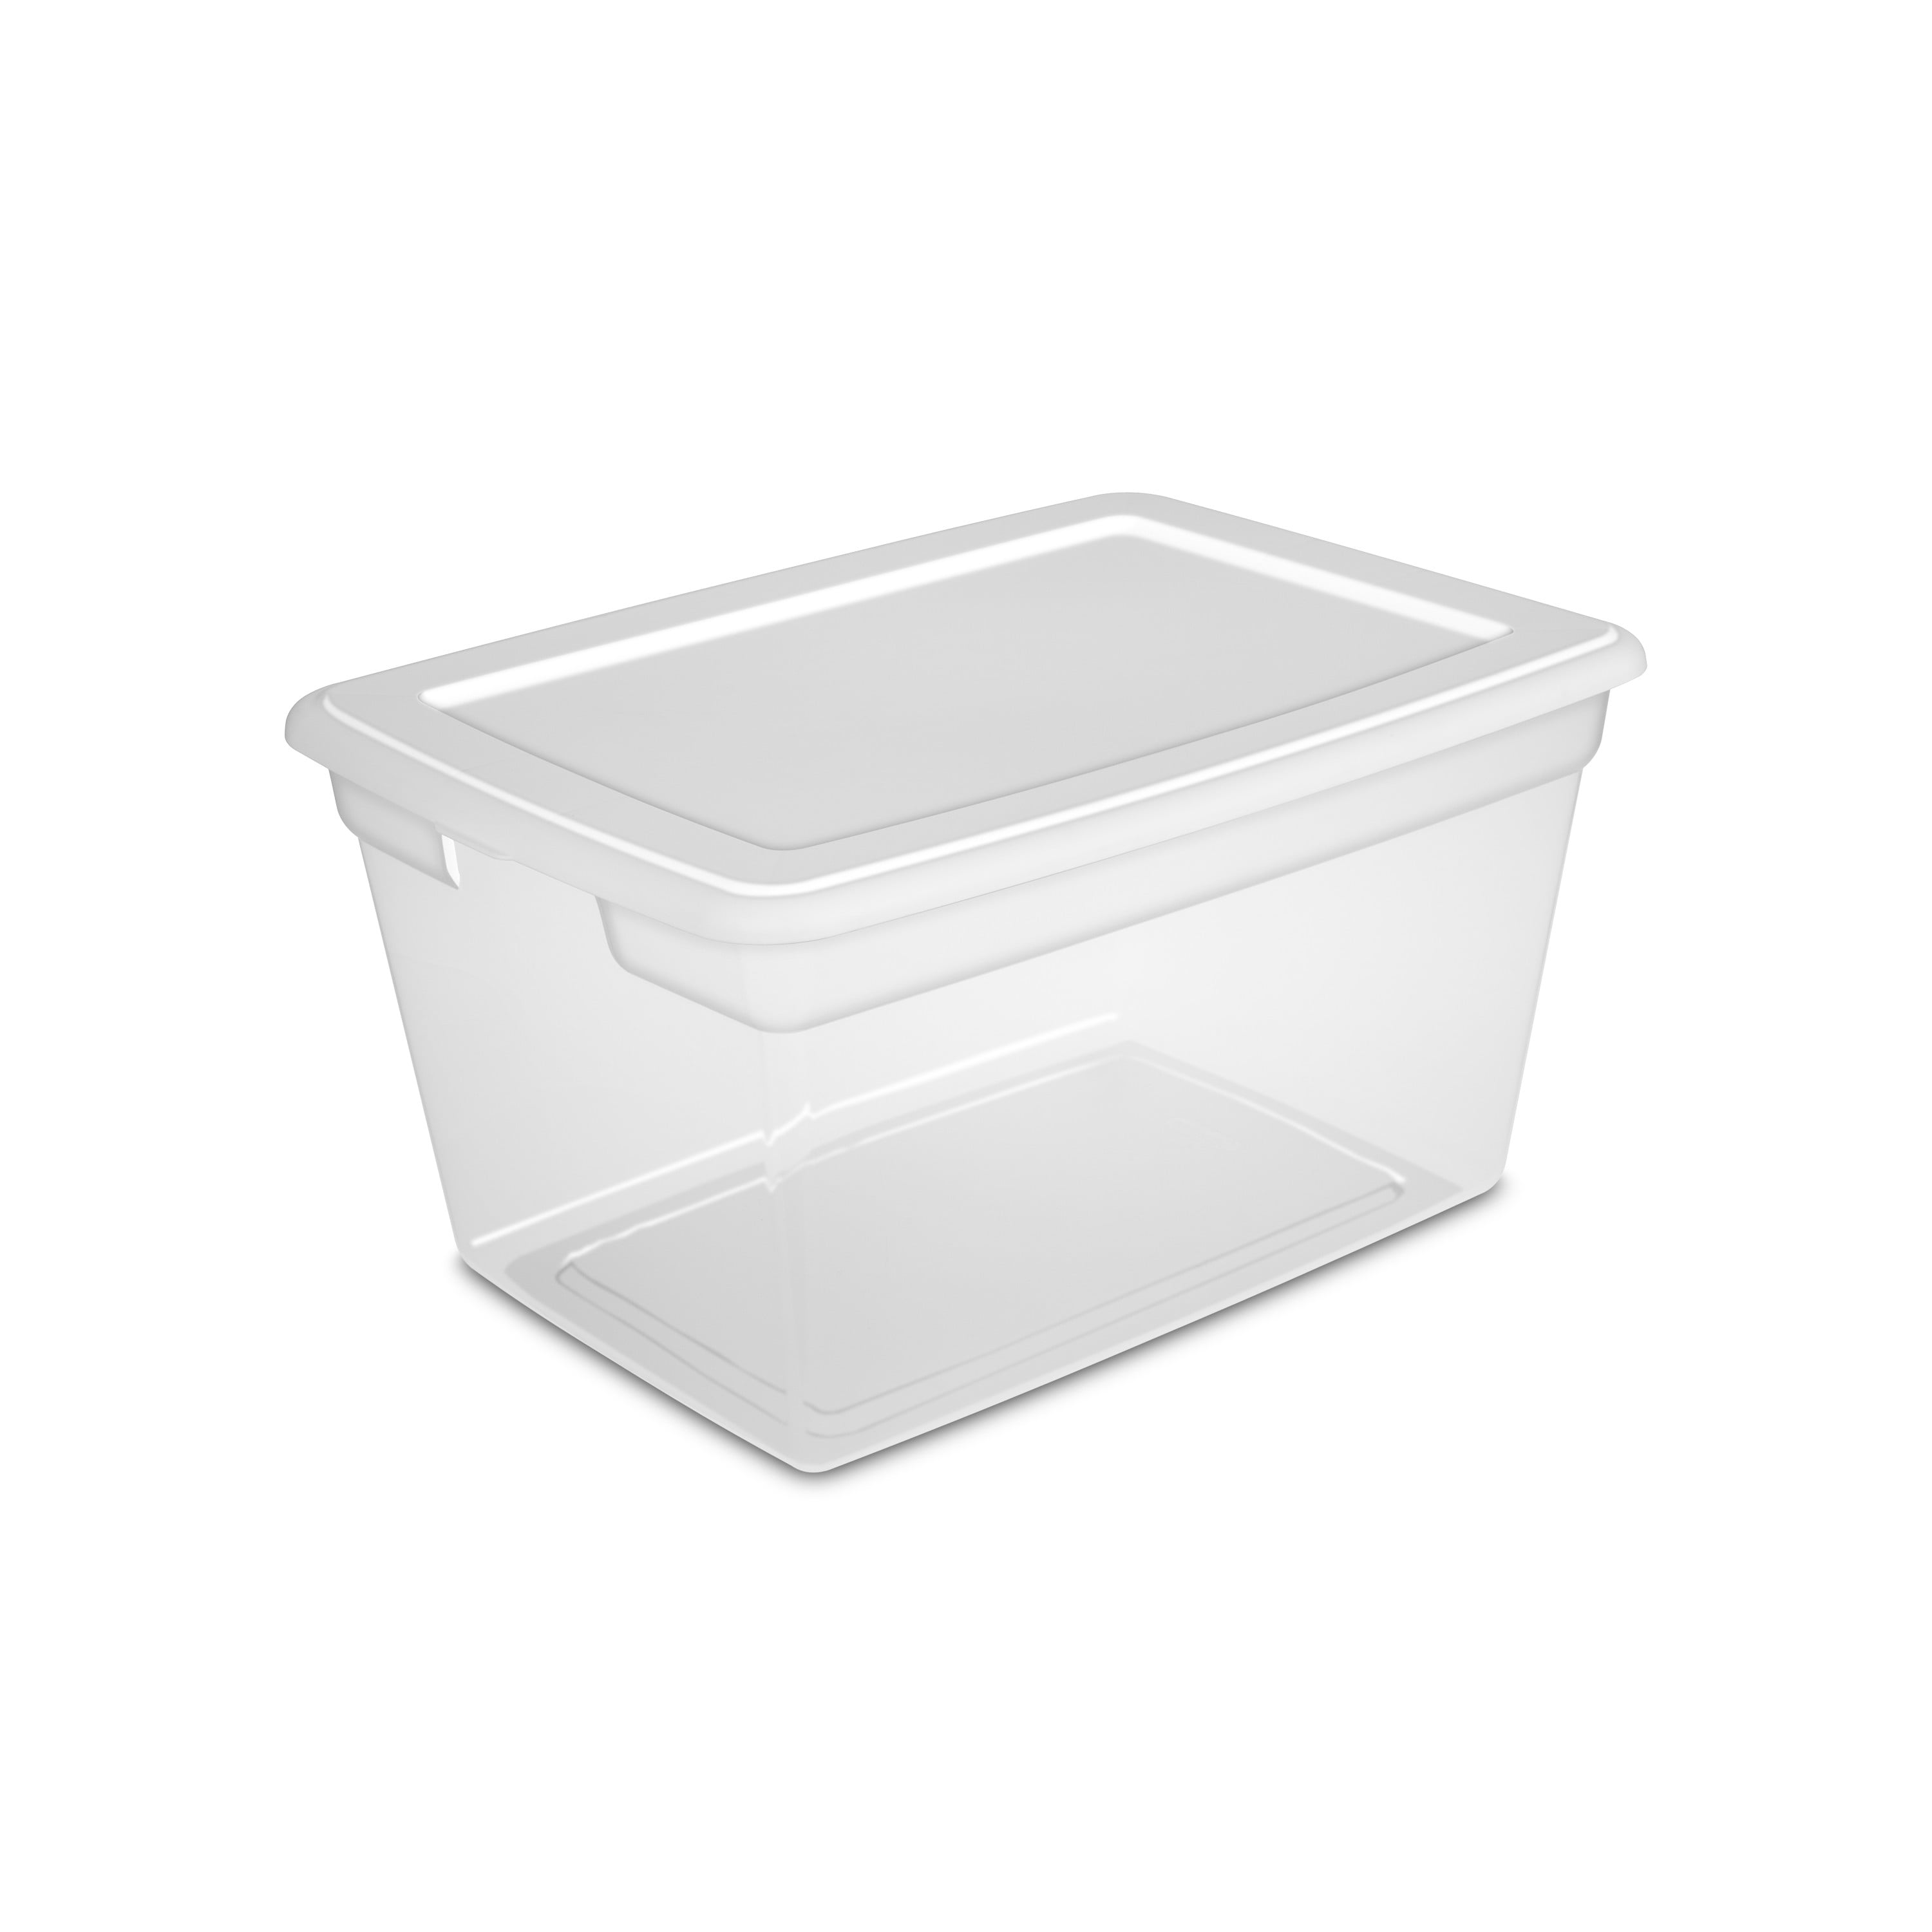 6 Packs Vcansay 6 Litre Clear Plastic Storage Bins with White Lids and Grey Handles 